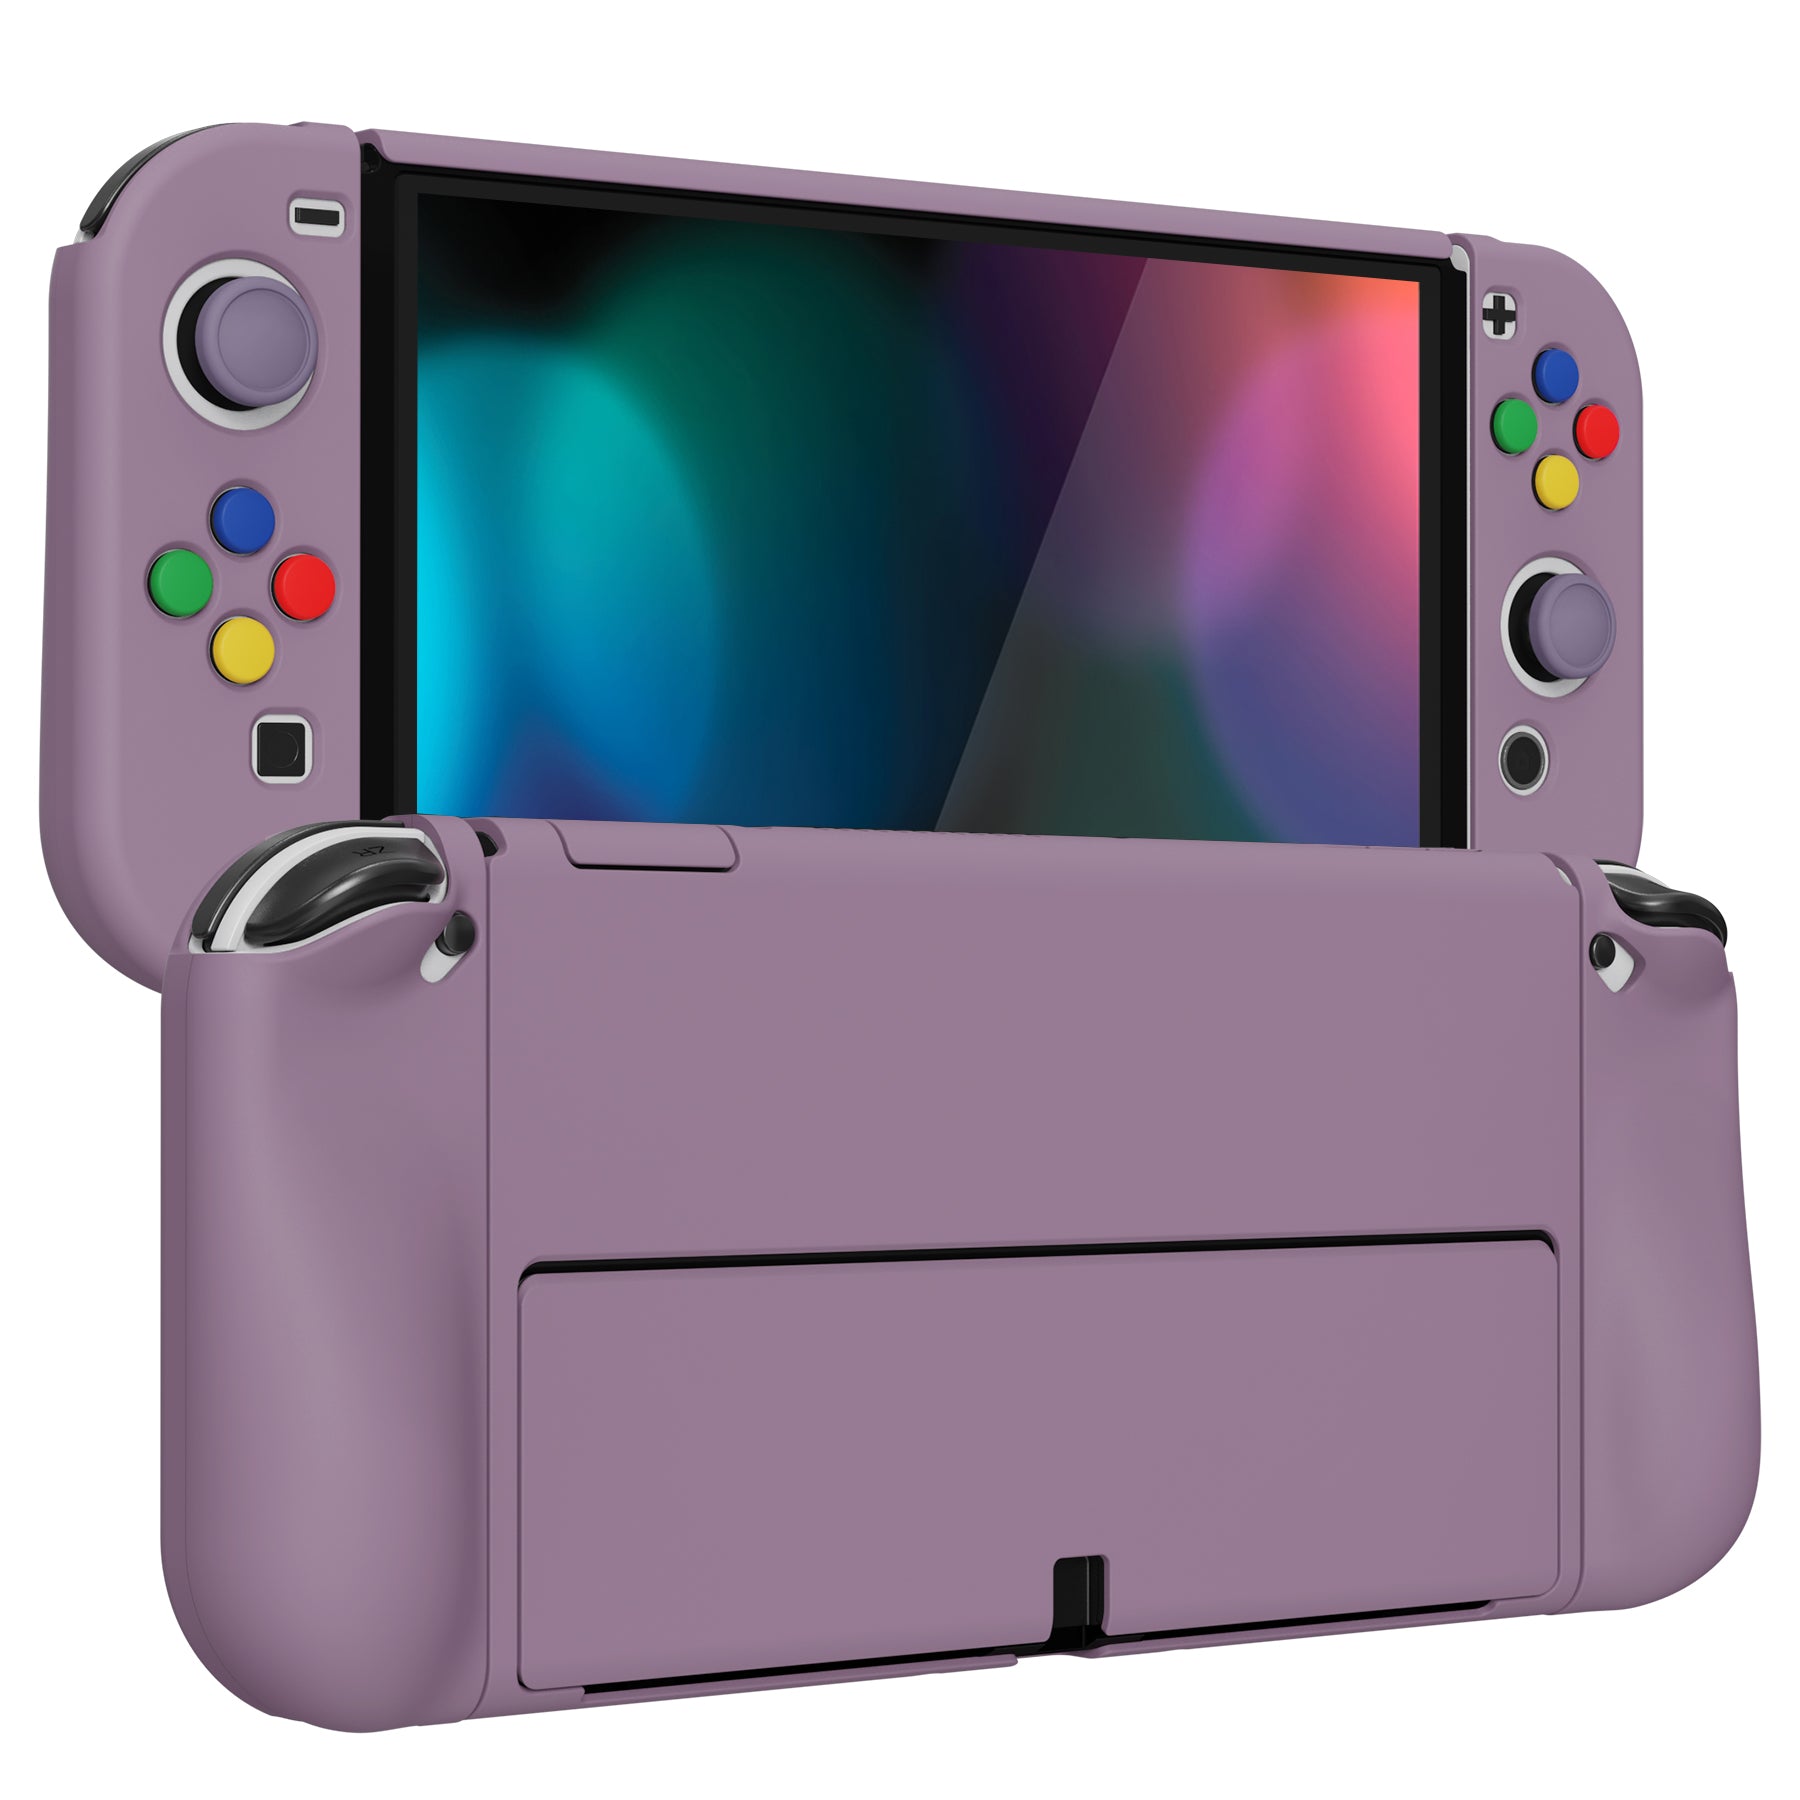 PlayVital AlterGrips Protective Slim Case for Nintendo Switch OLED, Ergonomic Grip Cover for Joycon, Dockable Hard Shell for Switch OLED with Thumb Grip Caps & Button Caps - Dark Grayish Violet - JSOYP3006 playvital